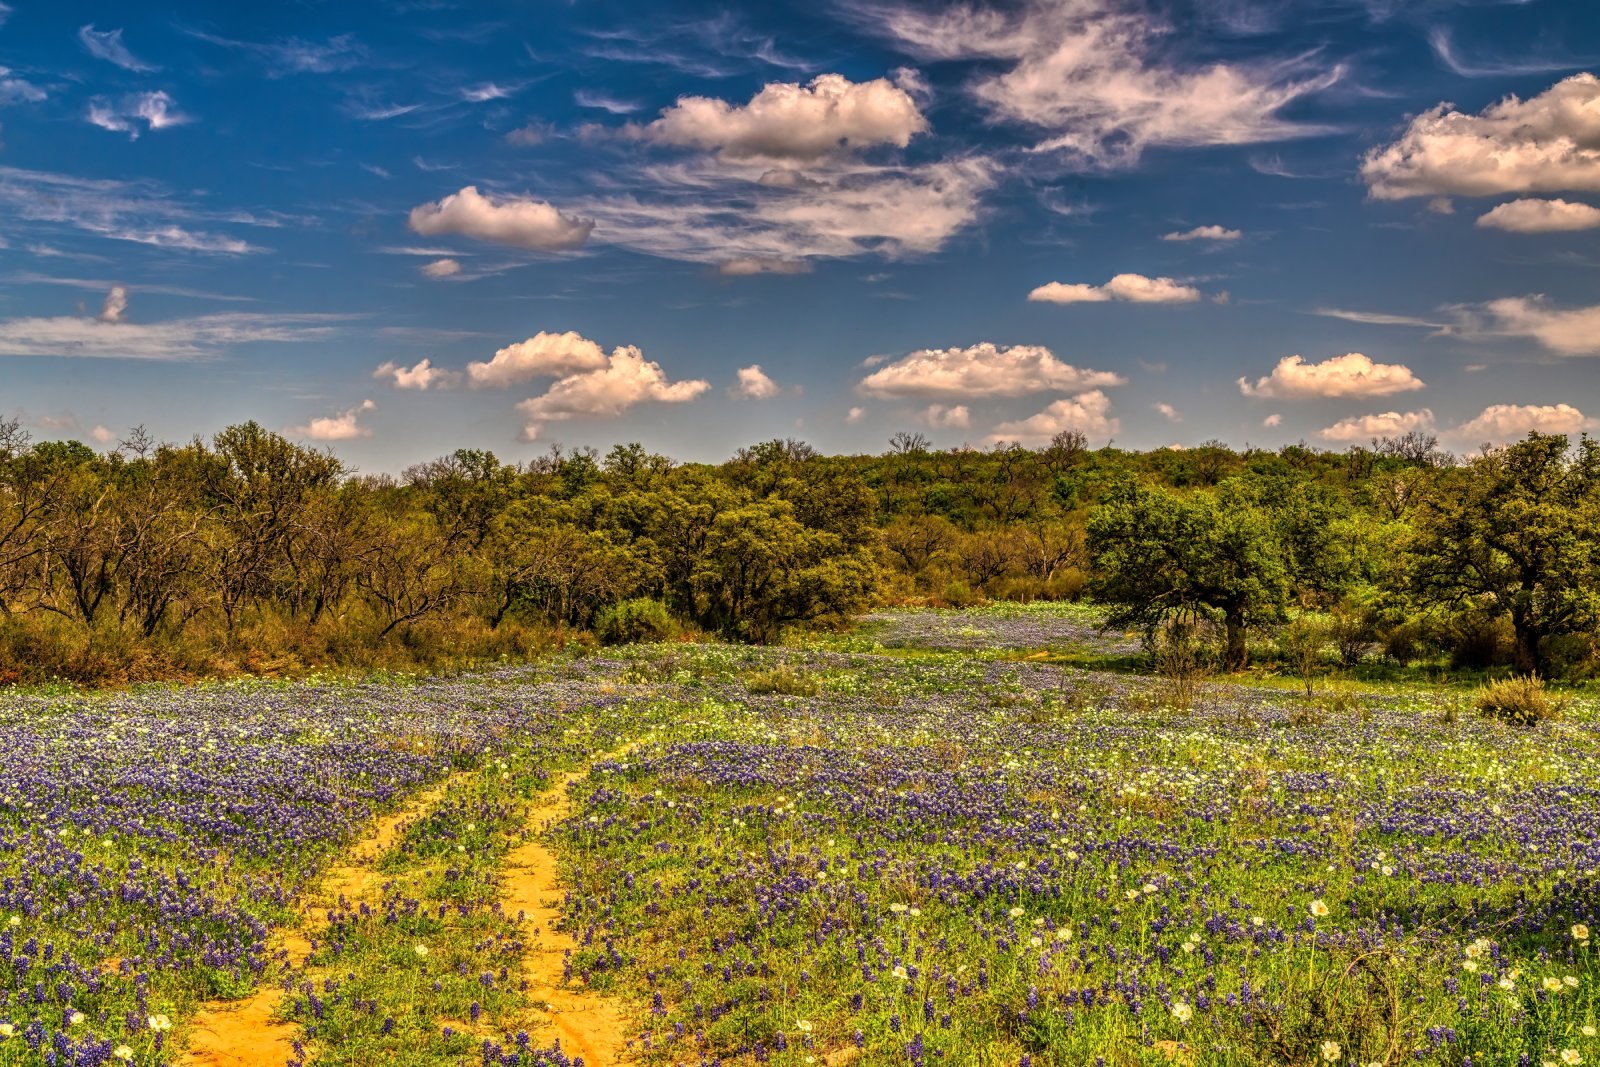 <p class="wp-caption-text">Image Credit: Shutterstock / Brent Coulter</p>  <p><span>Don’t overlook Texas in your wine travels. The Texas Hill Country, with its German heritage and warm hospitality, offers unique varietals and blends that capture the spirit of the Lone Star State.</span></p>